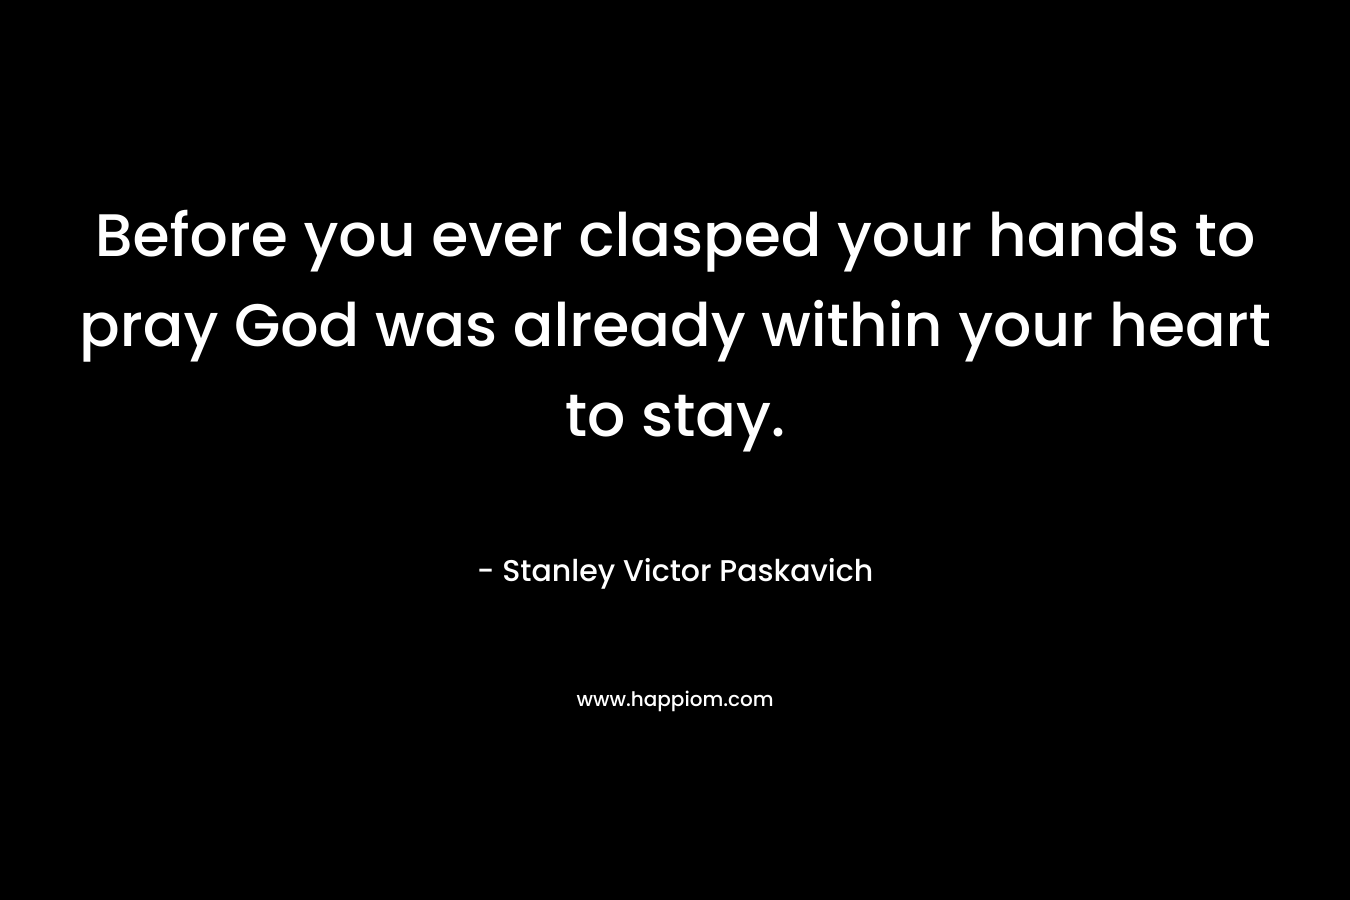 Before you ever clasped your hands to pray God was already within your heart to stay. – Stanley Victor Paskavich